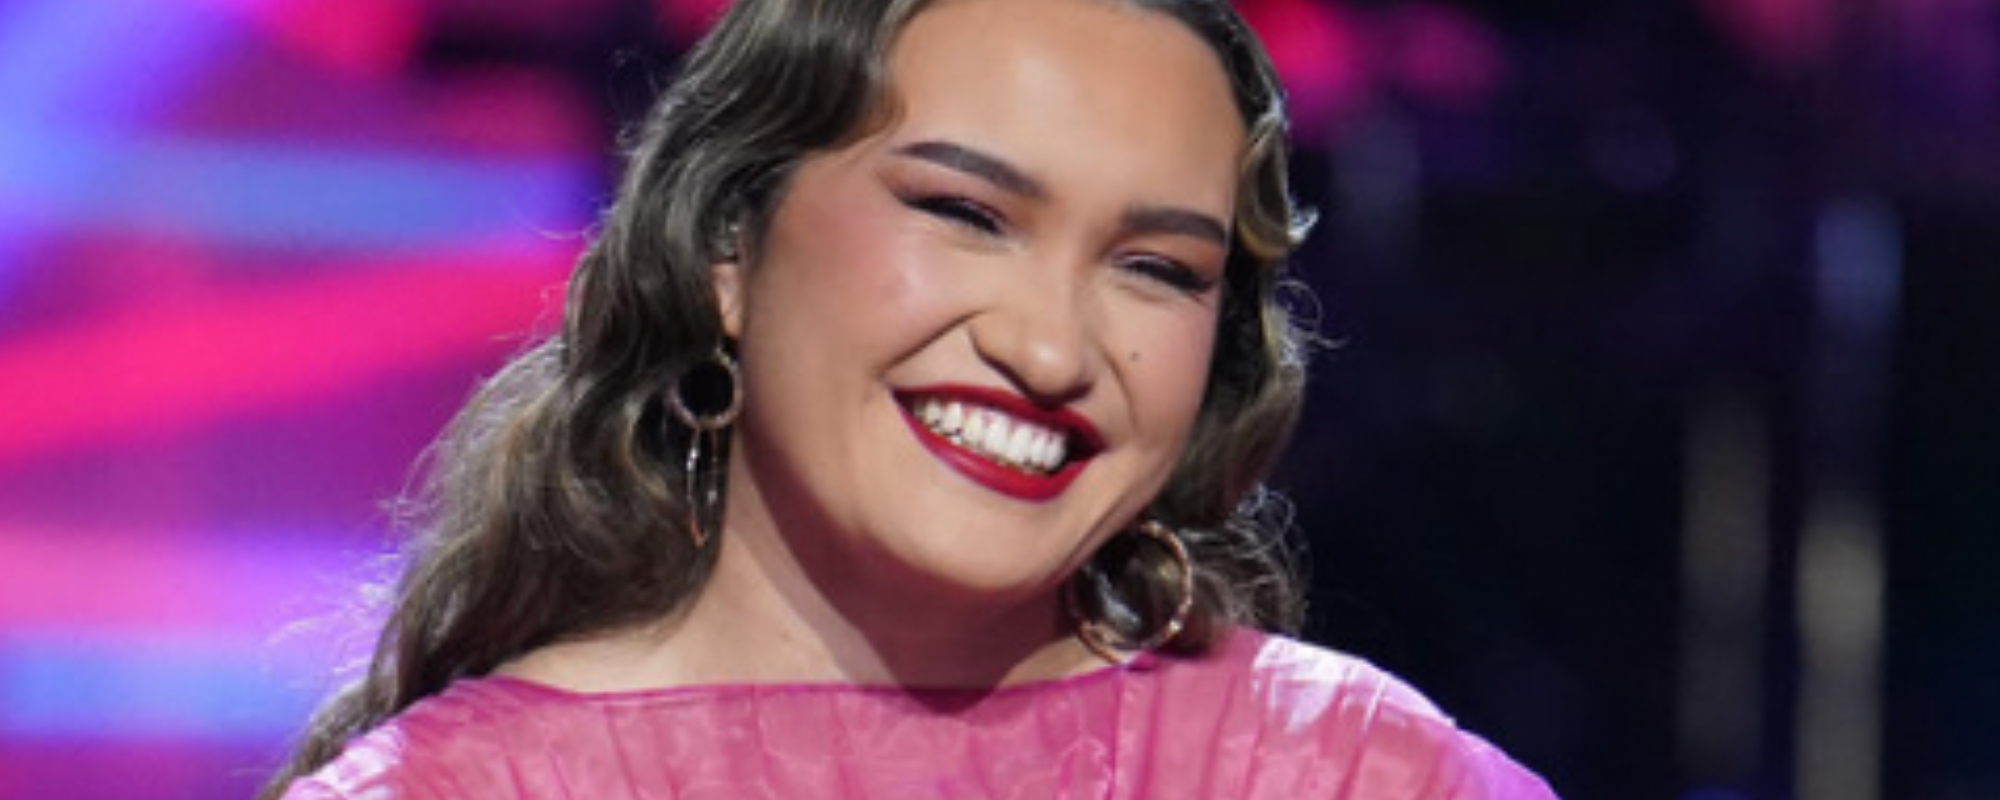 Kala Banham Finishes 'The Voice' With "Absolutely Perfect" Performance